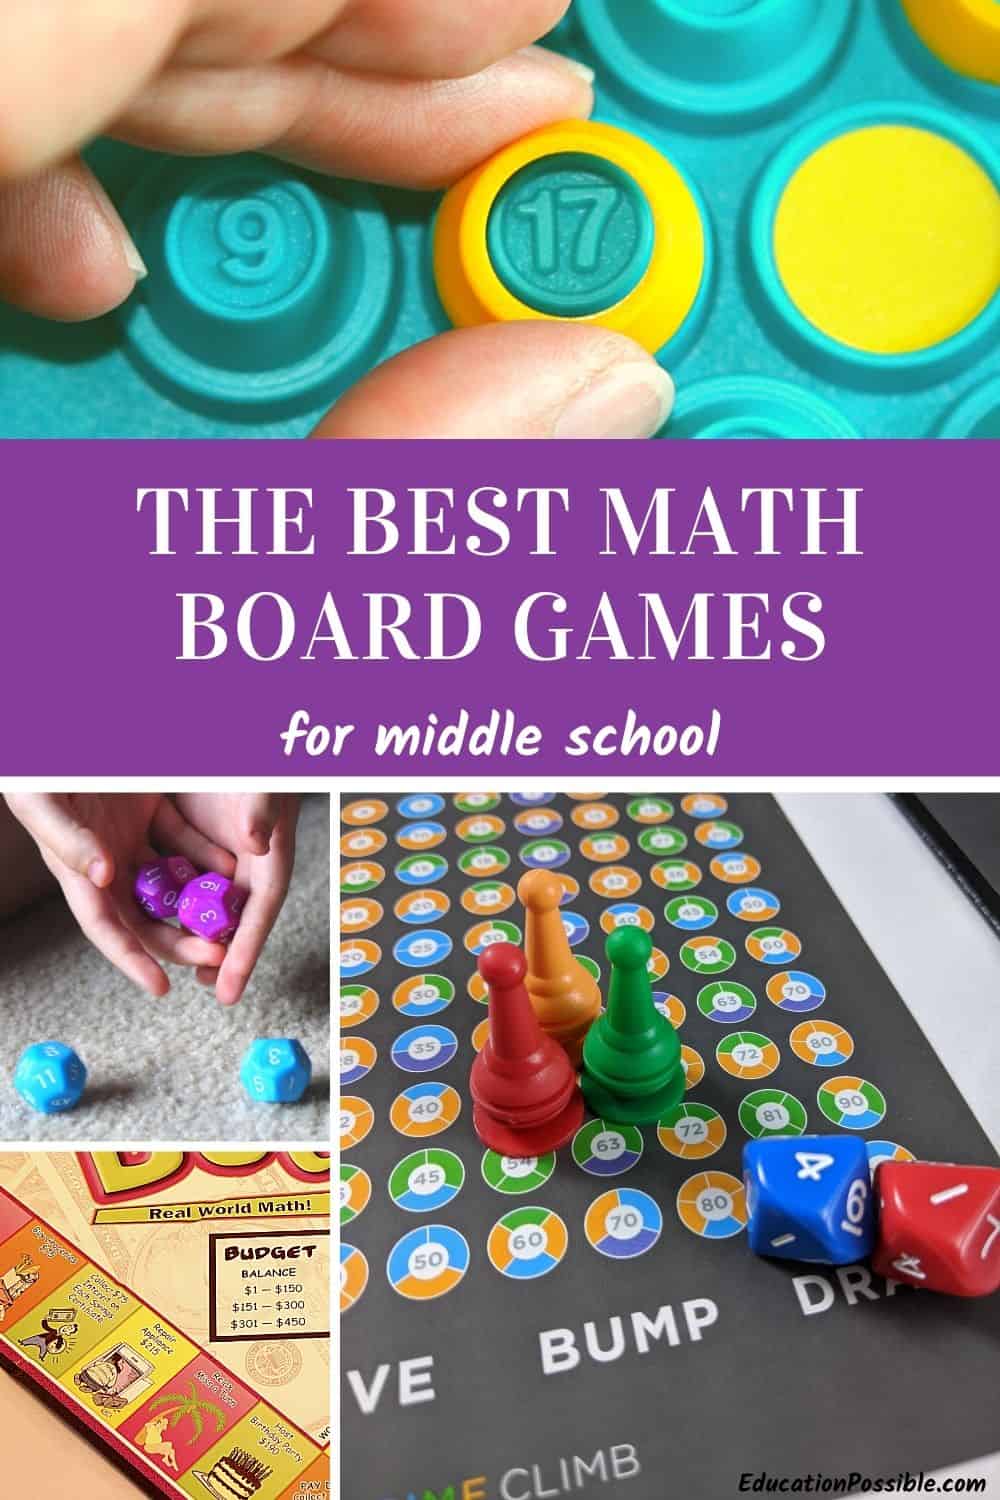 The Best Math Board Games for Middle School